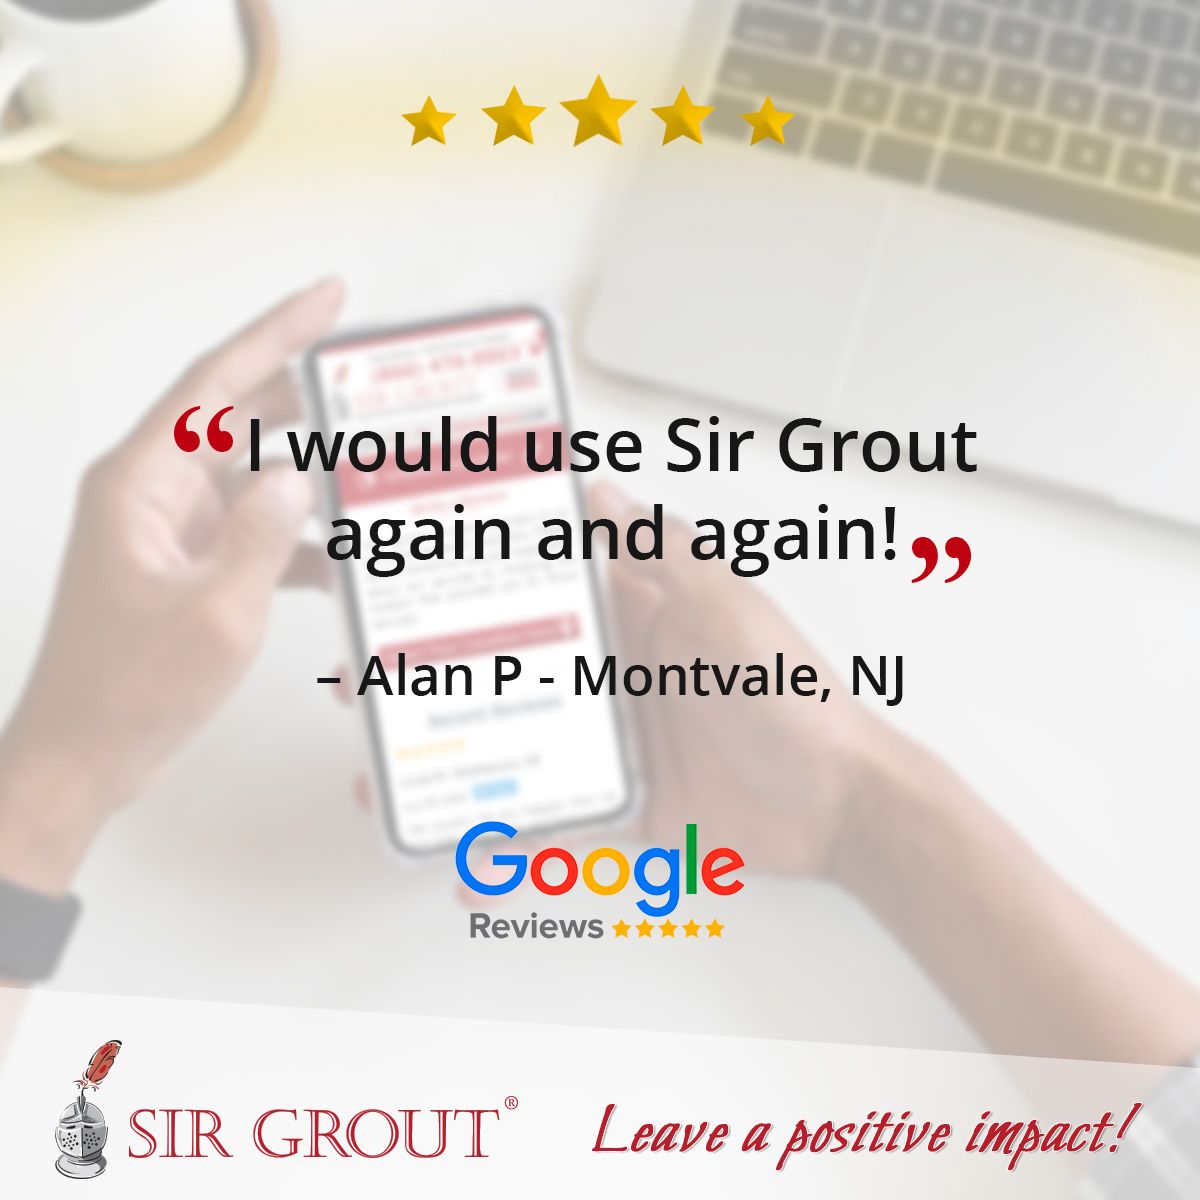 I would use Sir Grout again and again!